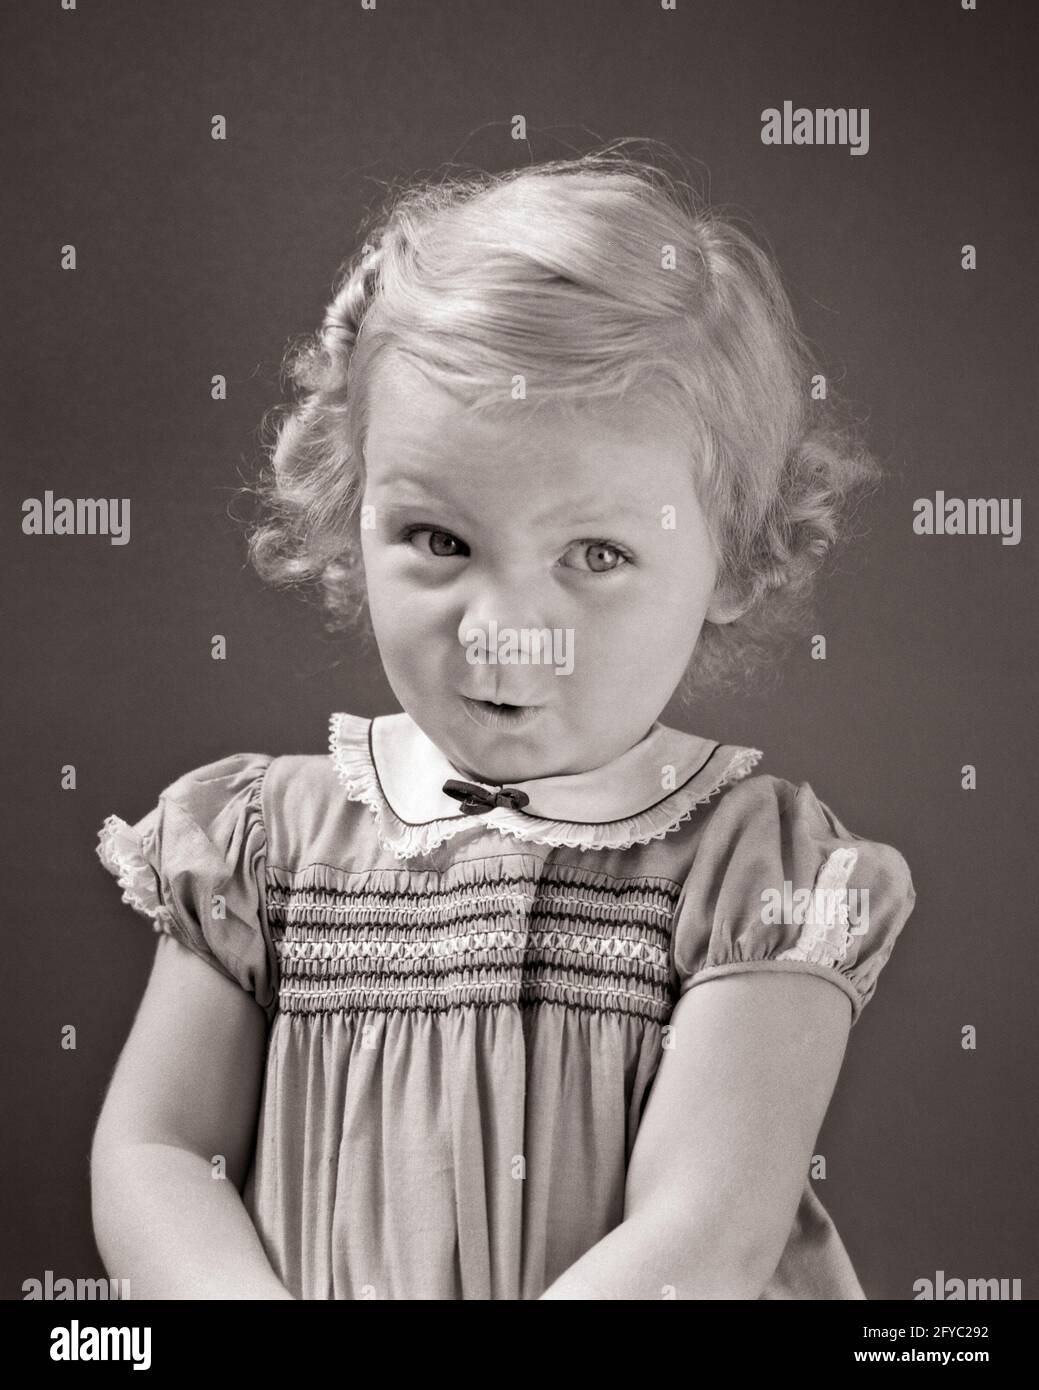 1930s 1940s BLOND TODDLER GIRL LOOKING AT CAMERA UP AND TO THE SIDE SHY BASHFUL FACIAL EXPRESSION WEARING DRESS WITH SMOCKING - j3100 HAR001 HARS HOME LIFE COPY SPACE HALF-LENGTH EXPRESSIONS B&W EYE CONTACT HAPPINESS DISCOVERY AND THE TO UP SHY PLEASANT AGREEABLE CHARMING JUVENILES LOVABLE PLEASING ADORABLE APPEALING BABY GIRL BASHFUL BLACK AND WHITE CAUCASIAN ETHNICITY HAR001 OLD FASHIONED SMOCKING Stock Photo